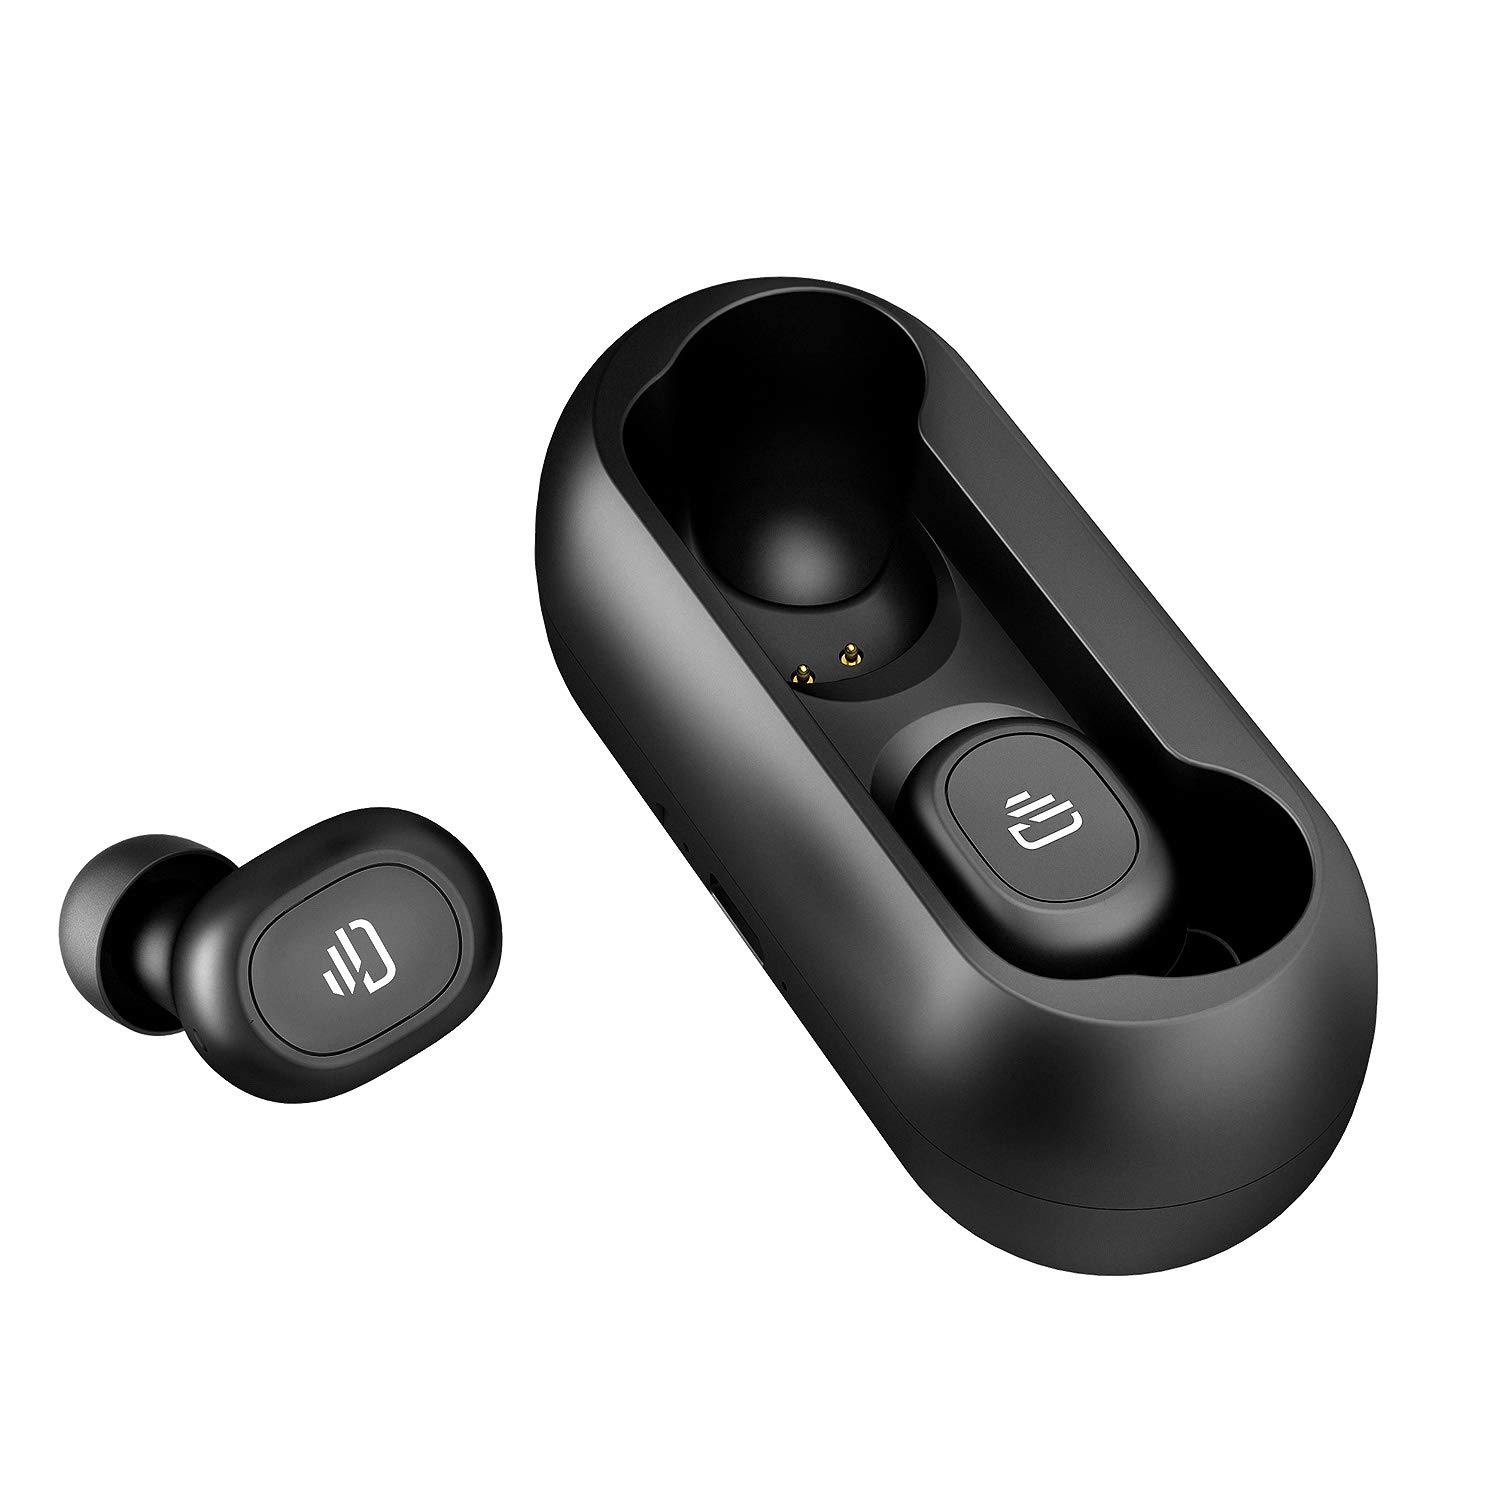 Win a pair of Dudios Bluetooth earbuds